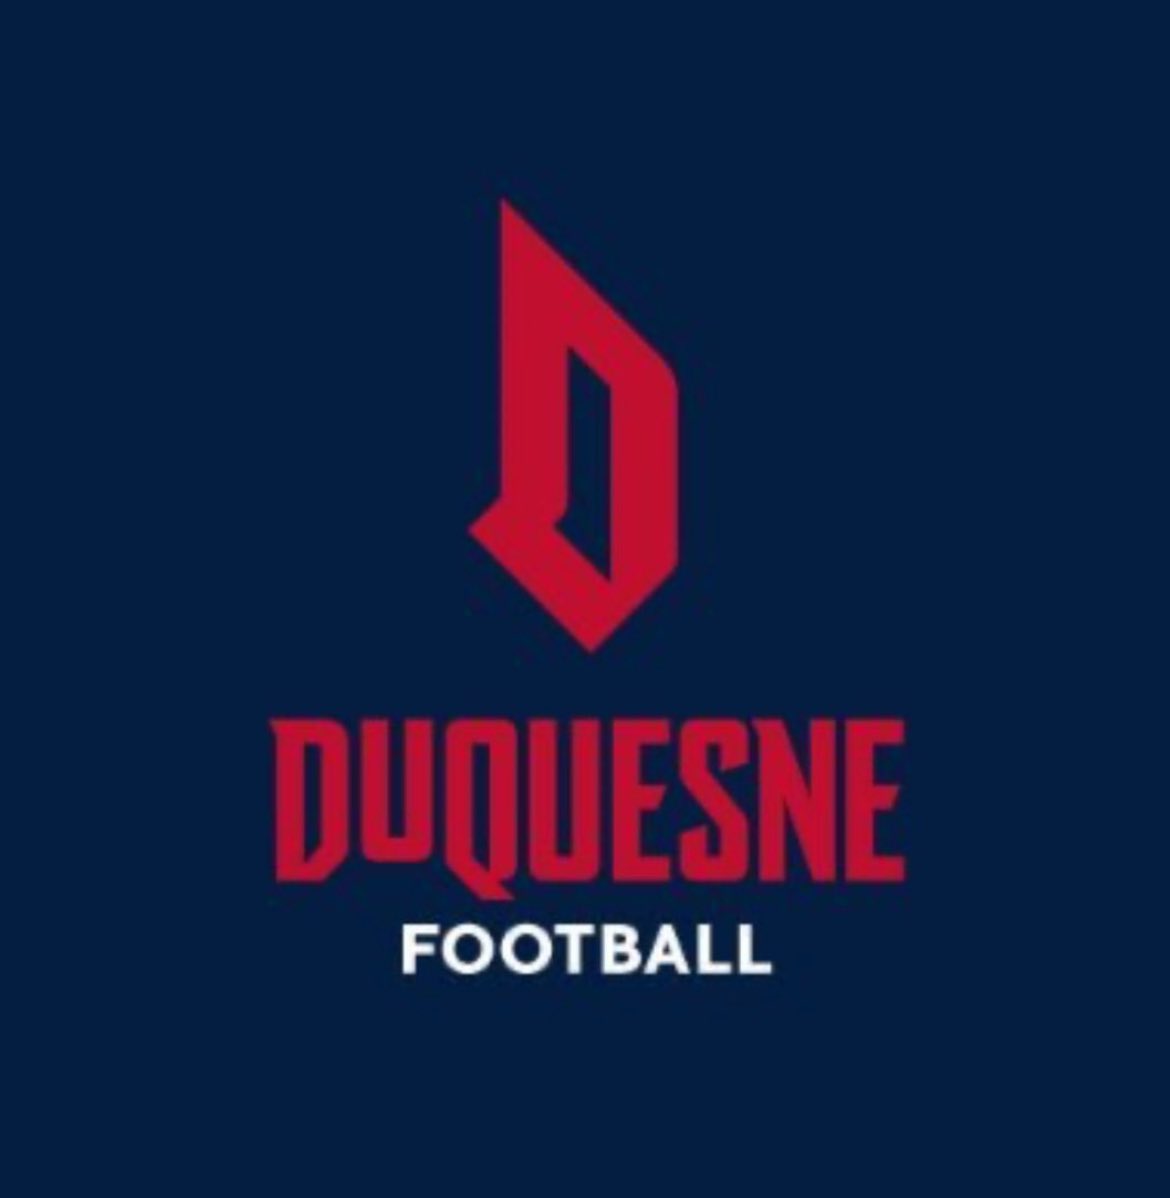 After a great conversation with @CoachMJacobs34 I am blessed to say I’ve received my 1st DIVISION I offer from @DuqFB #AGTG @PEBODY83 @Coach_Boyd12 @UCSFootball @JohnSirmon